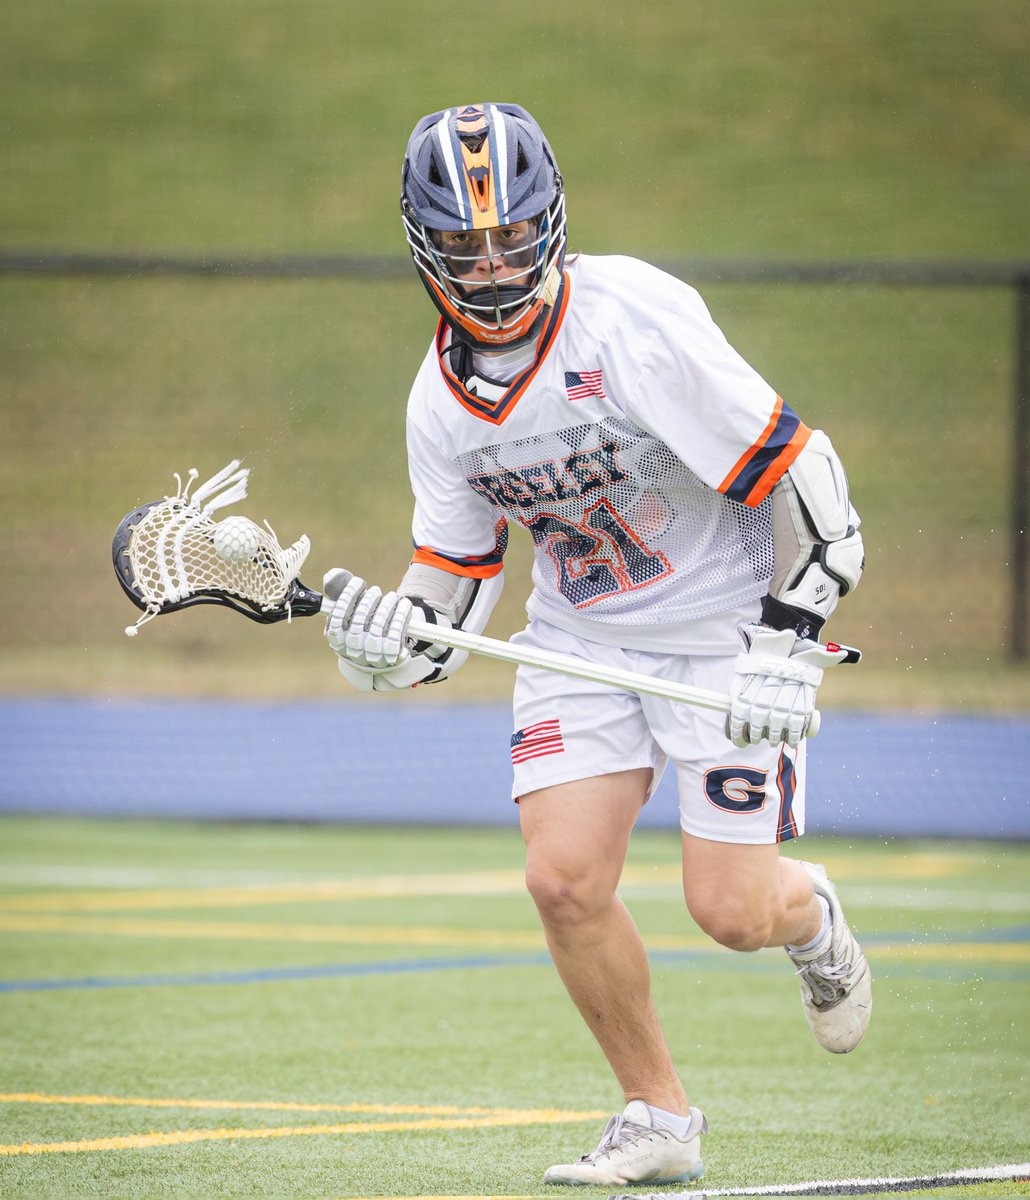 While Matthew Byrne was not crowned Lacrosse Player of the Week, he's always a winner to us. 😊 Congratulations on your nomination and keep playing at your best level! 
#GoGreeley #WeAreChappaqua